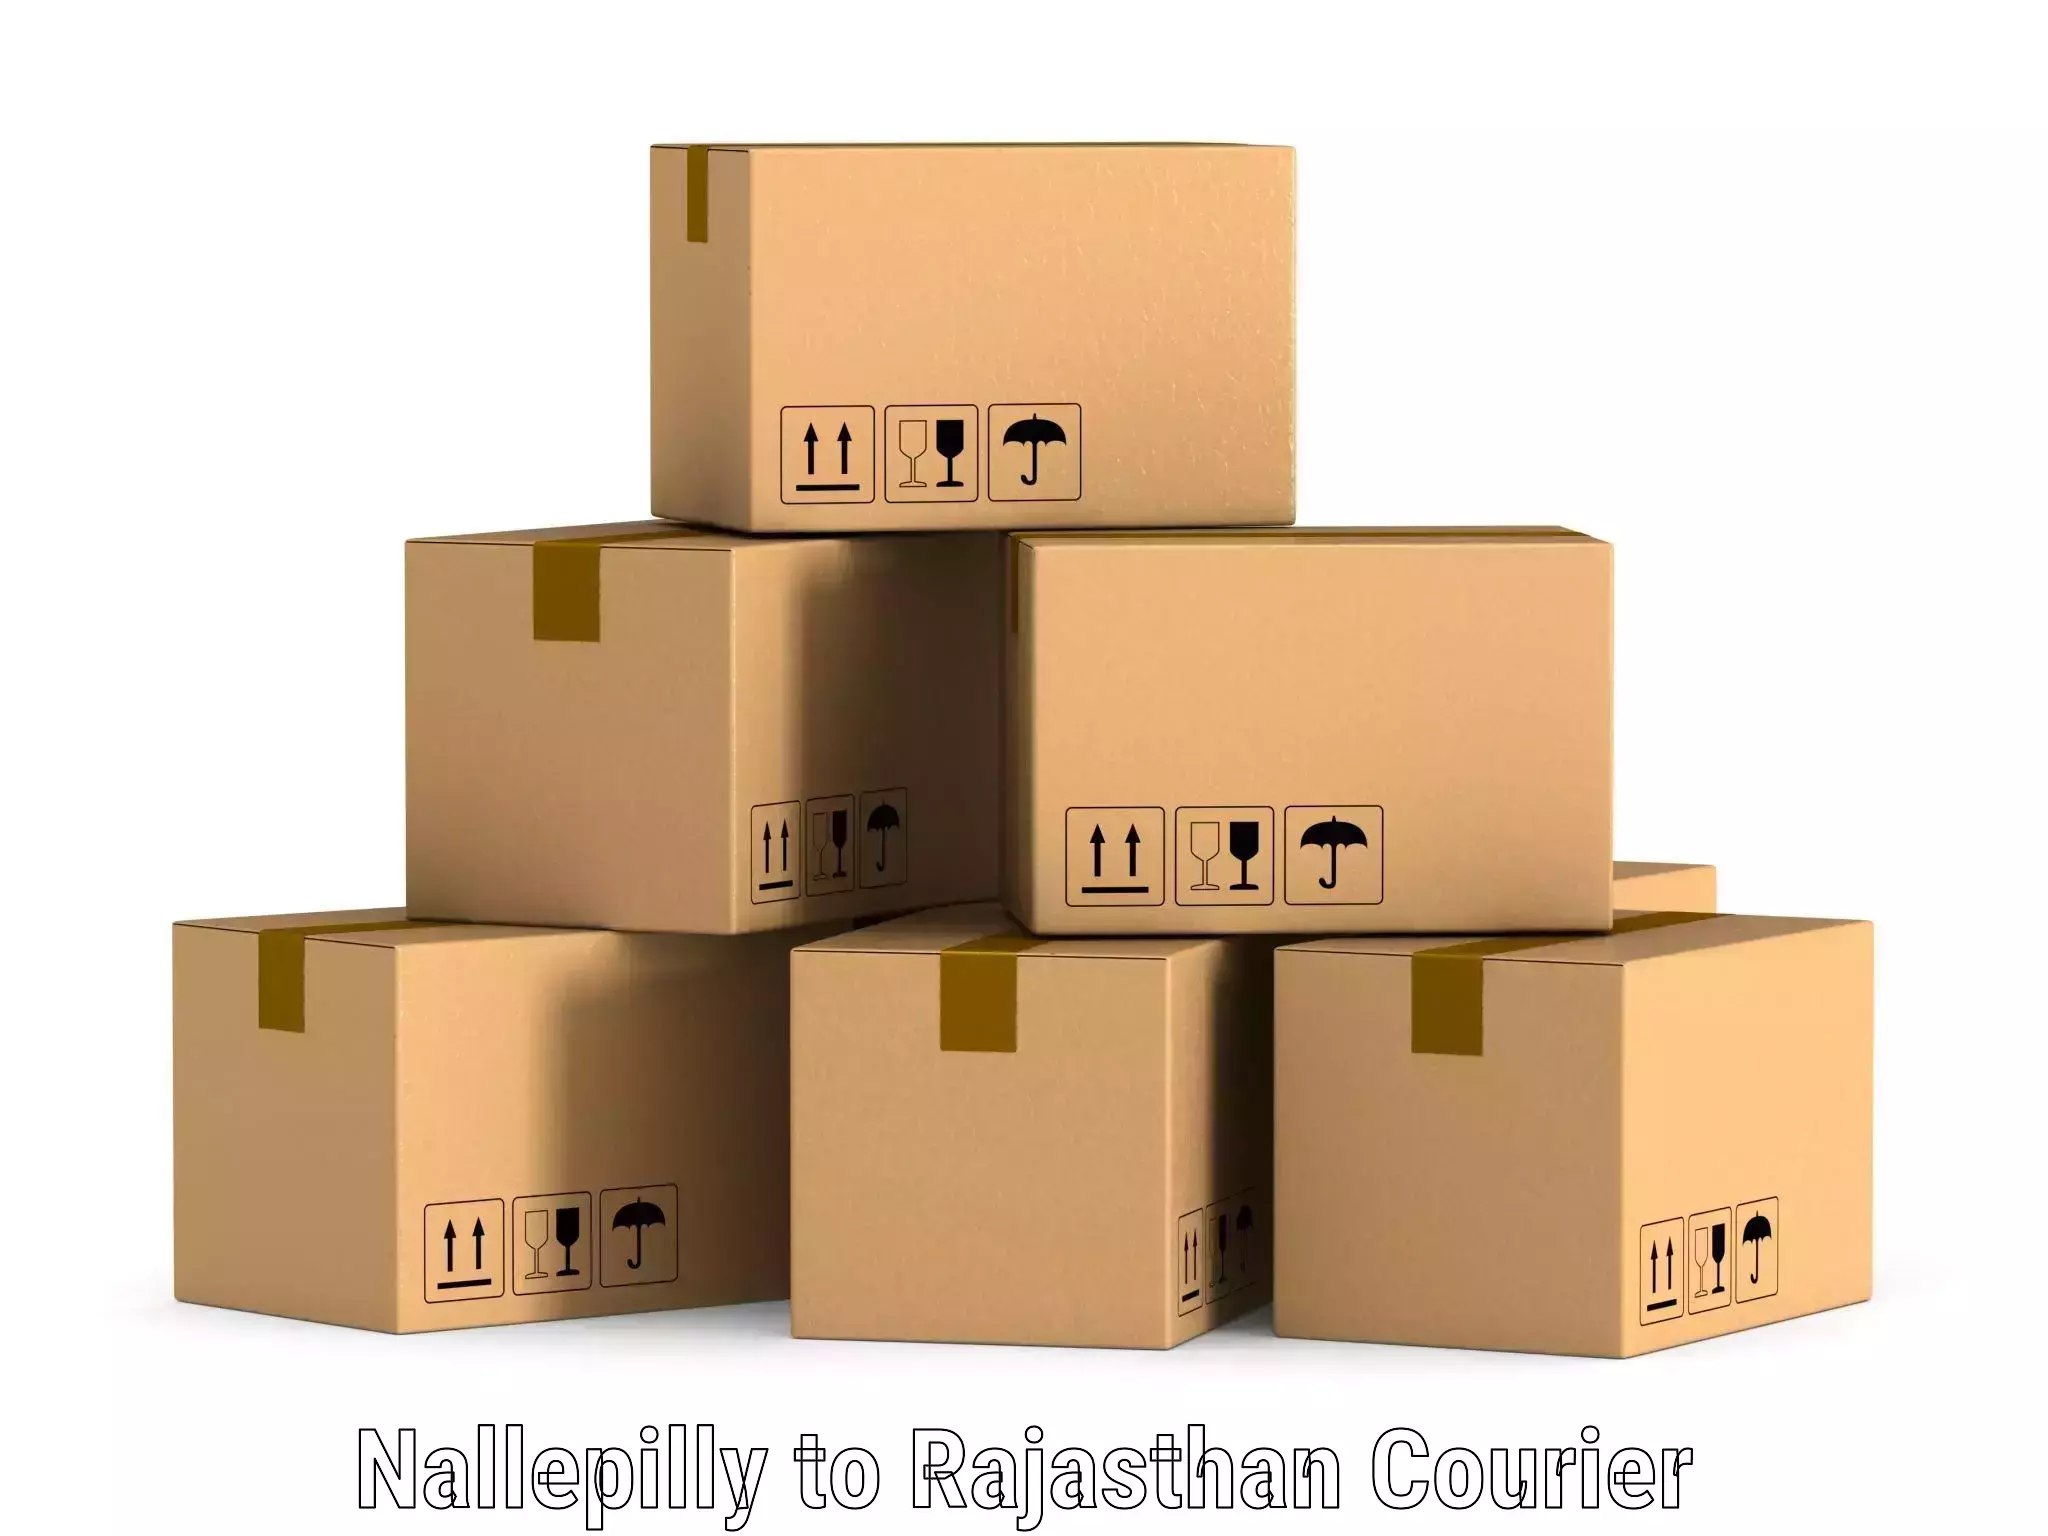 Multi-national courier services Nallepilly to Yathalakunta